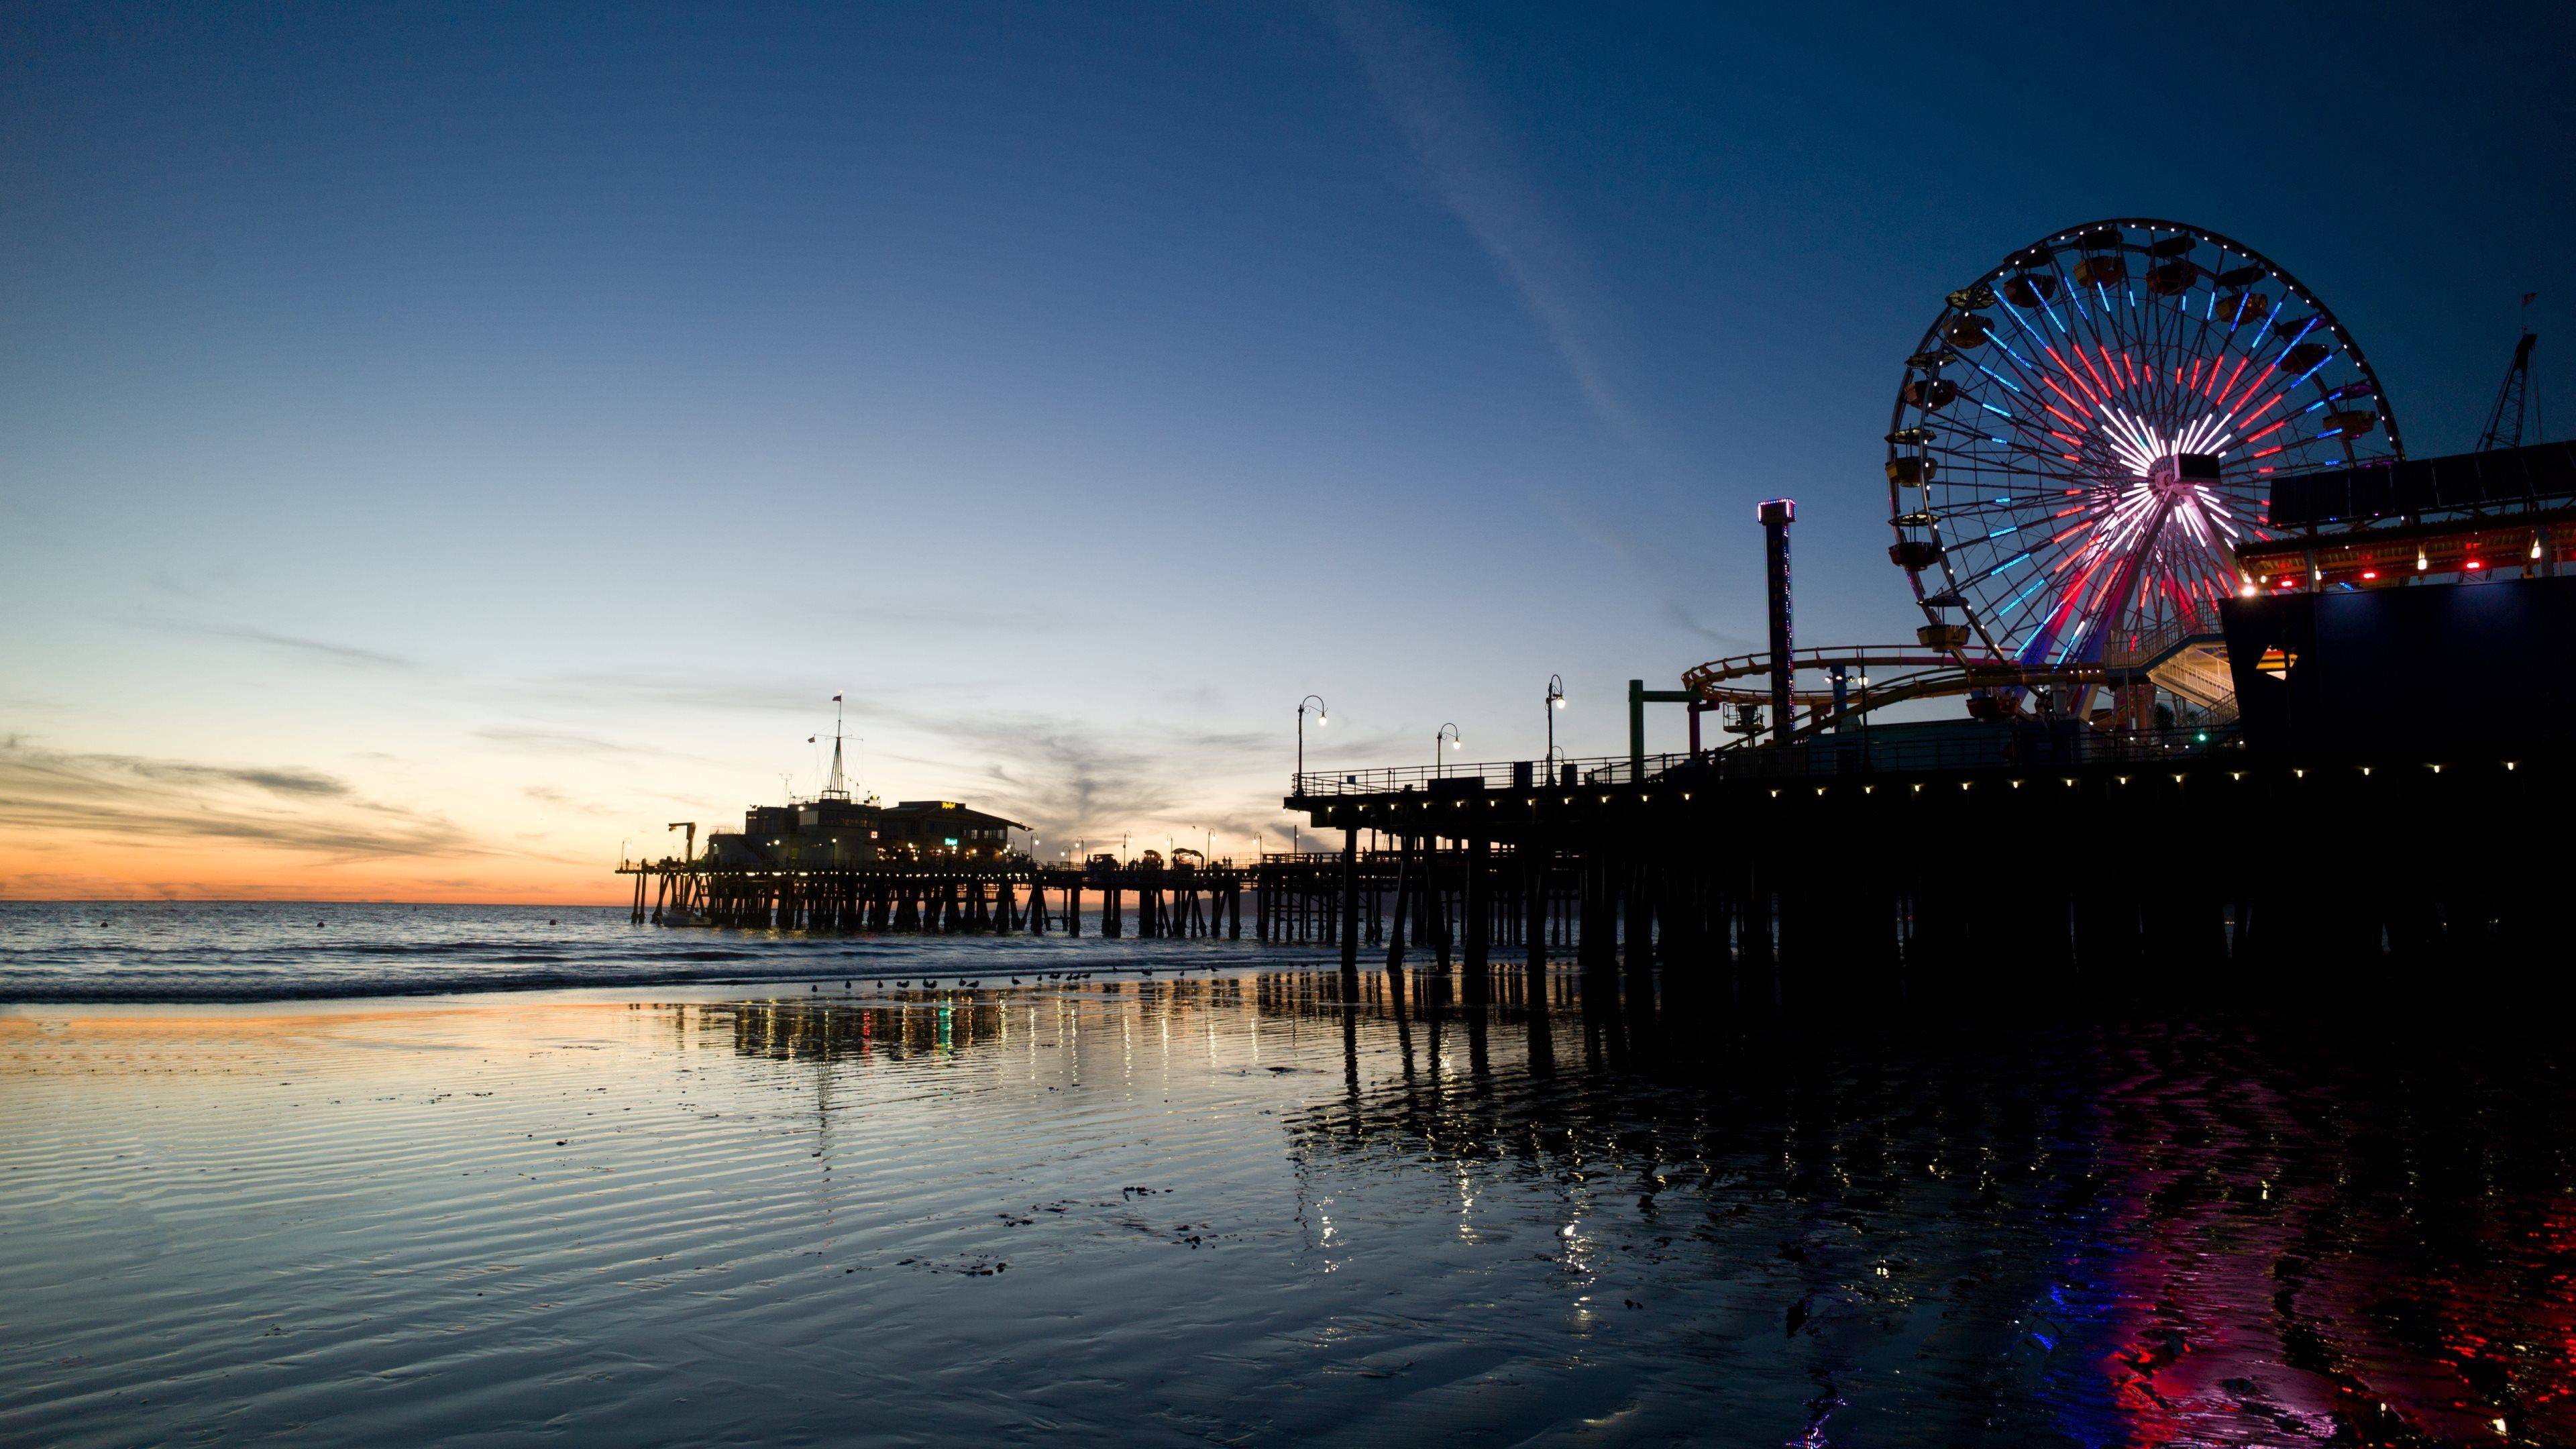 A Ferris wheel and a pier at sunset. - Los Angeles